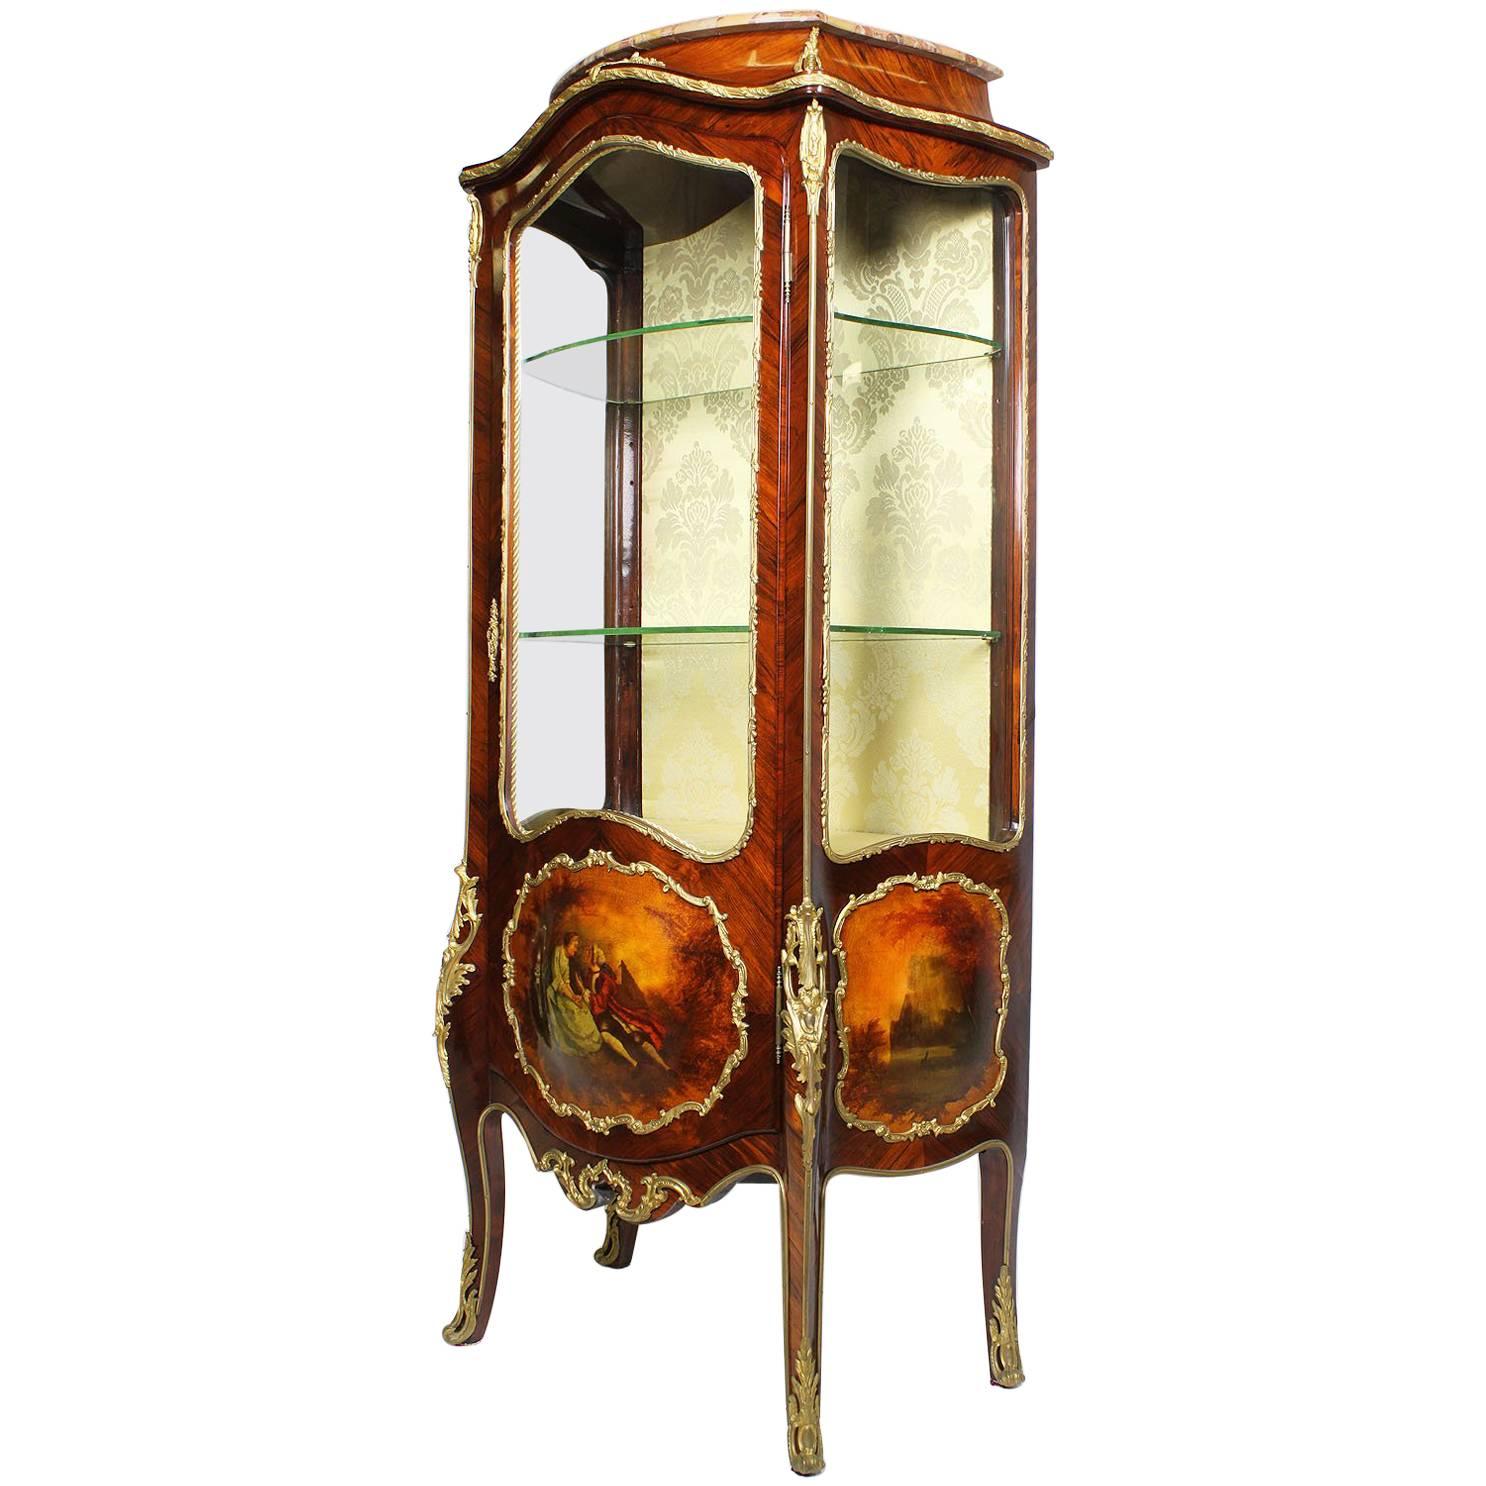 French 19th Century Louis XV Style Gilt Bronze-Mounted and Vernis Martin Vitrine